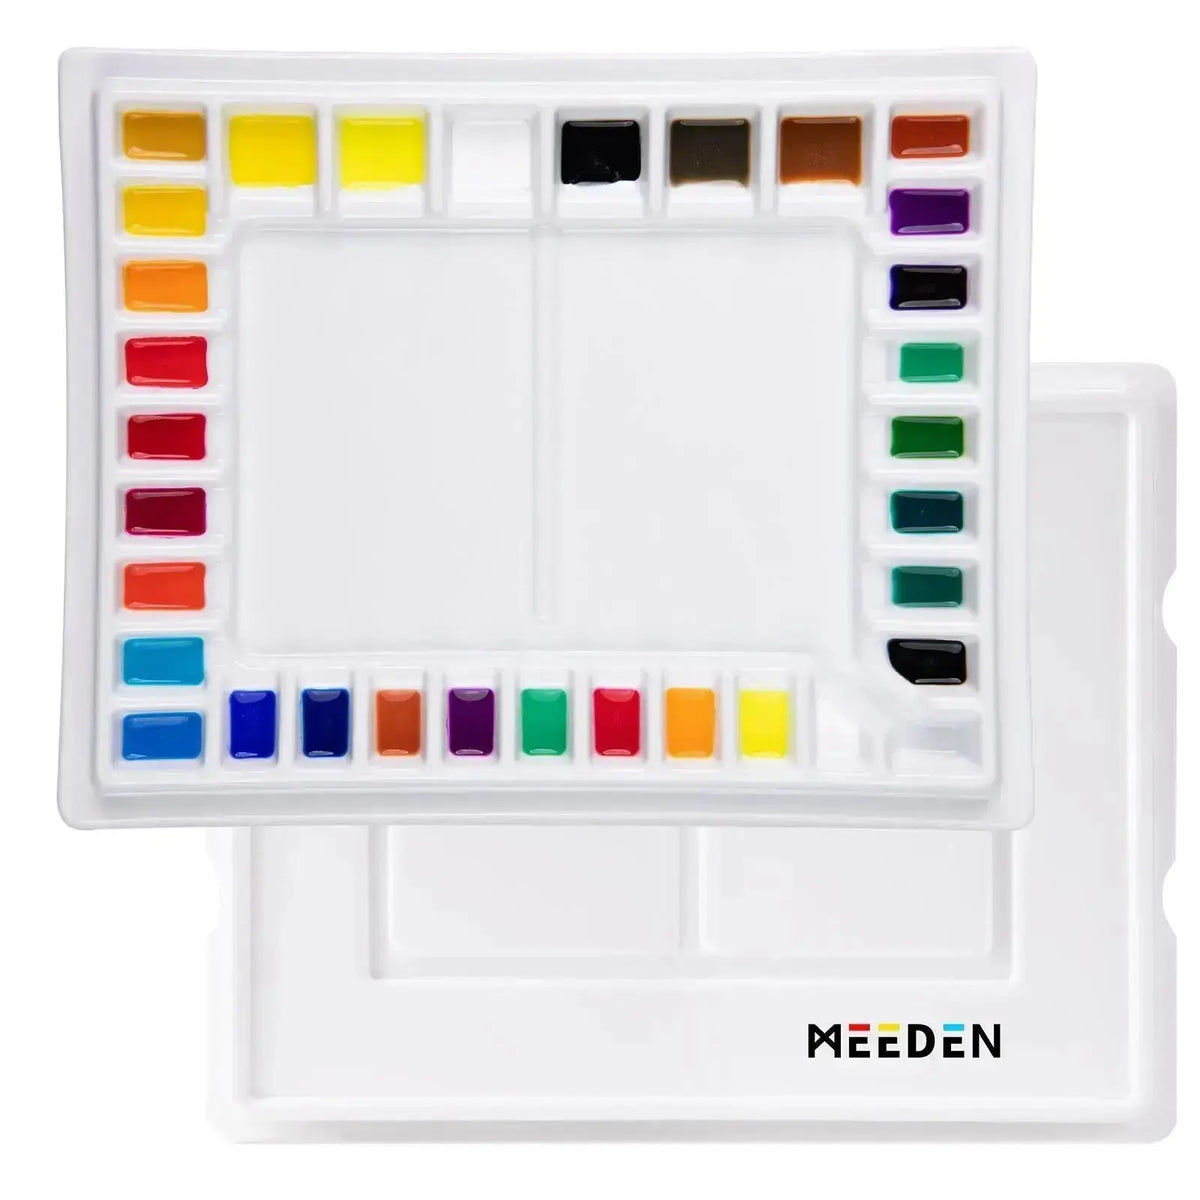 MEEDEN 33-Well Porcelain Painting Palette with Plastic Cover